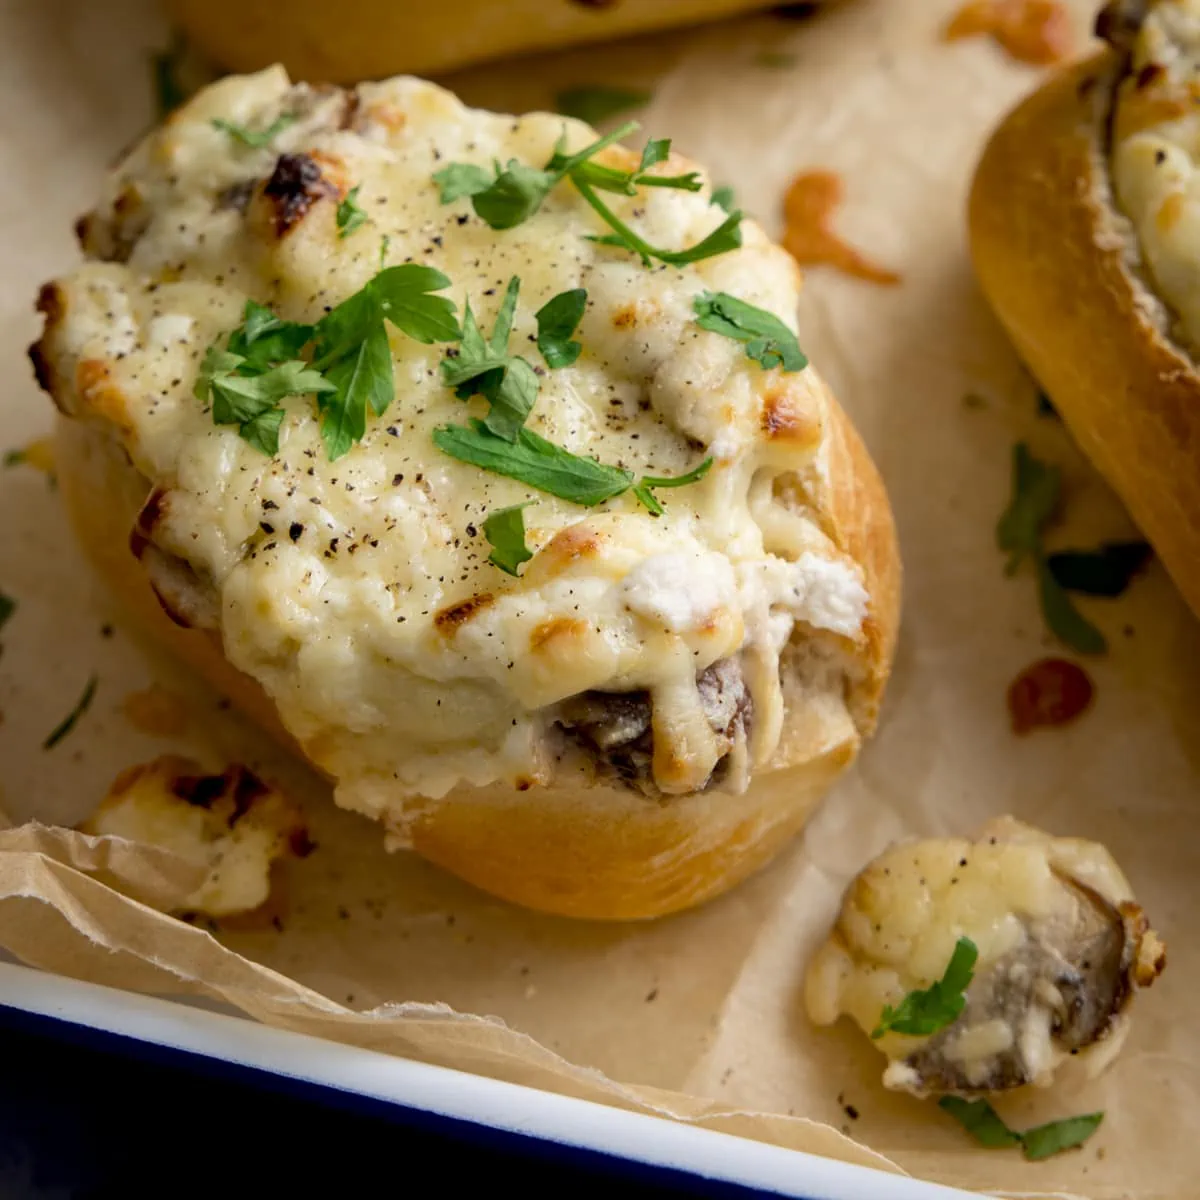 Square close up image of Cheesy Mushroom Stuffed Garlic Breads topped with parsley.